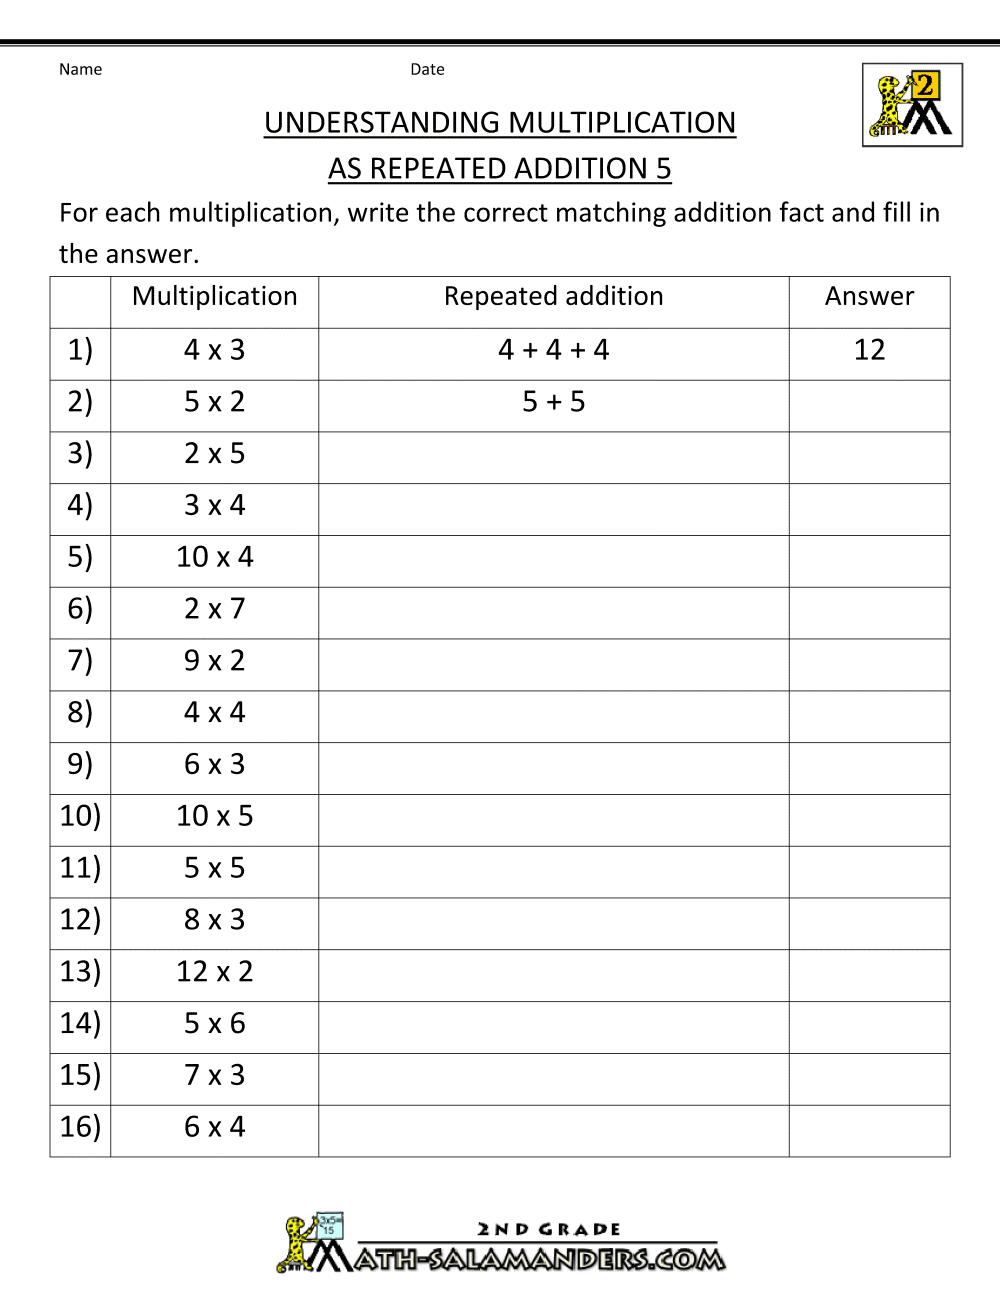 Standard Expanded And Word Form Distributive Property Of